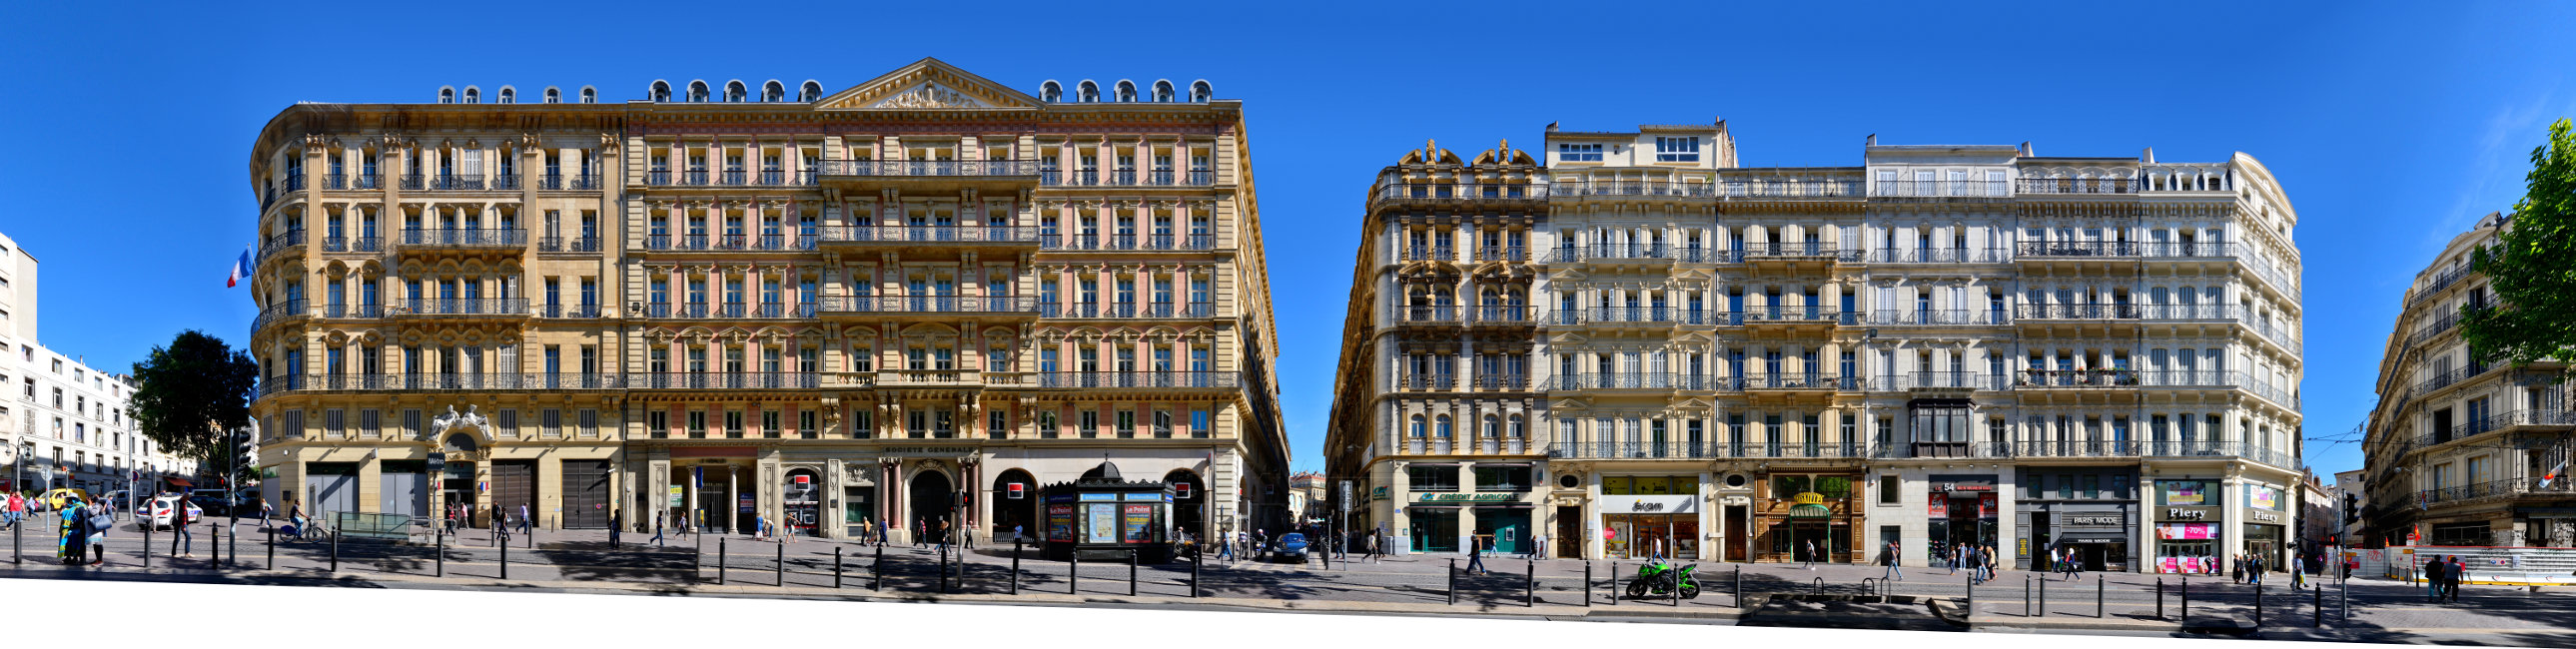 Marseille La Canebiere street front streetview panorama Facades